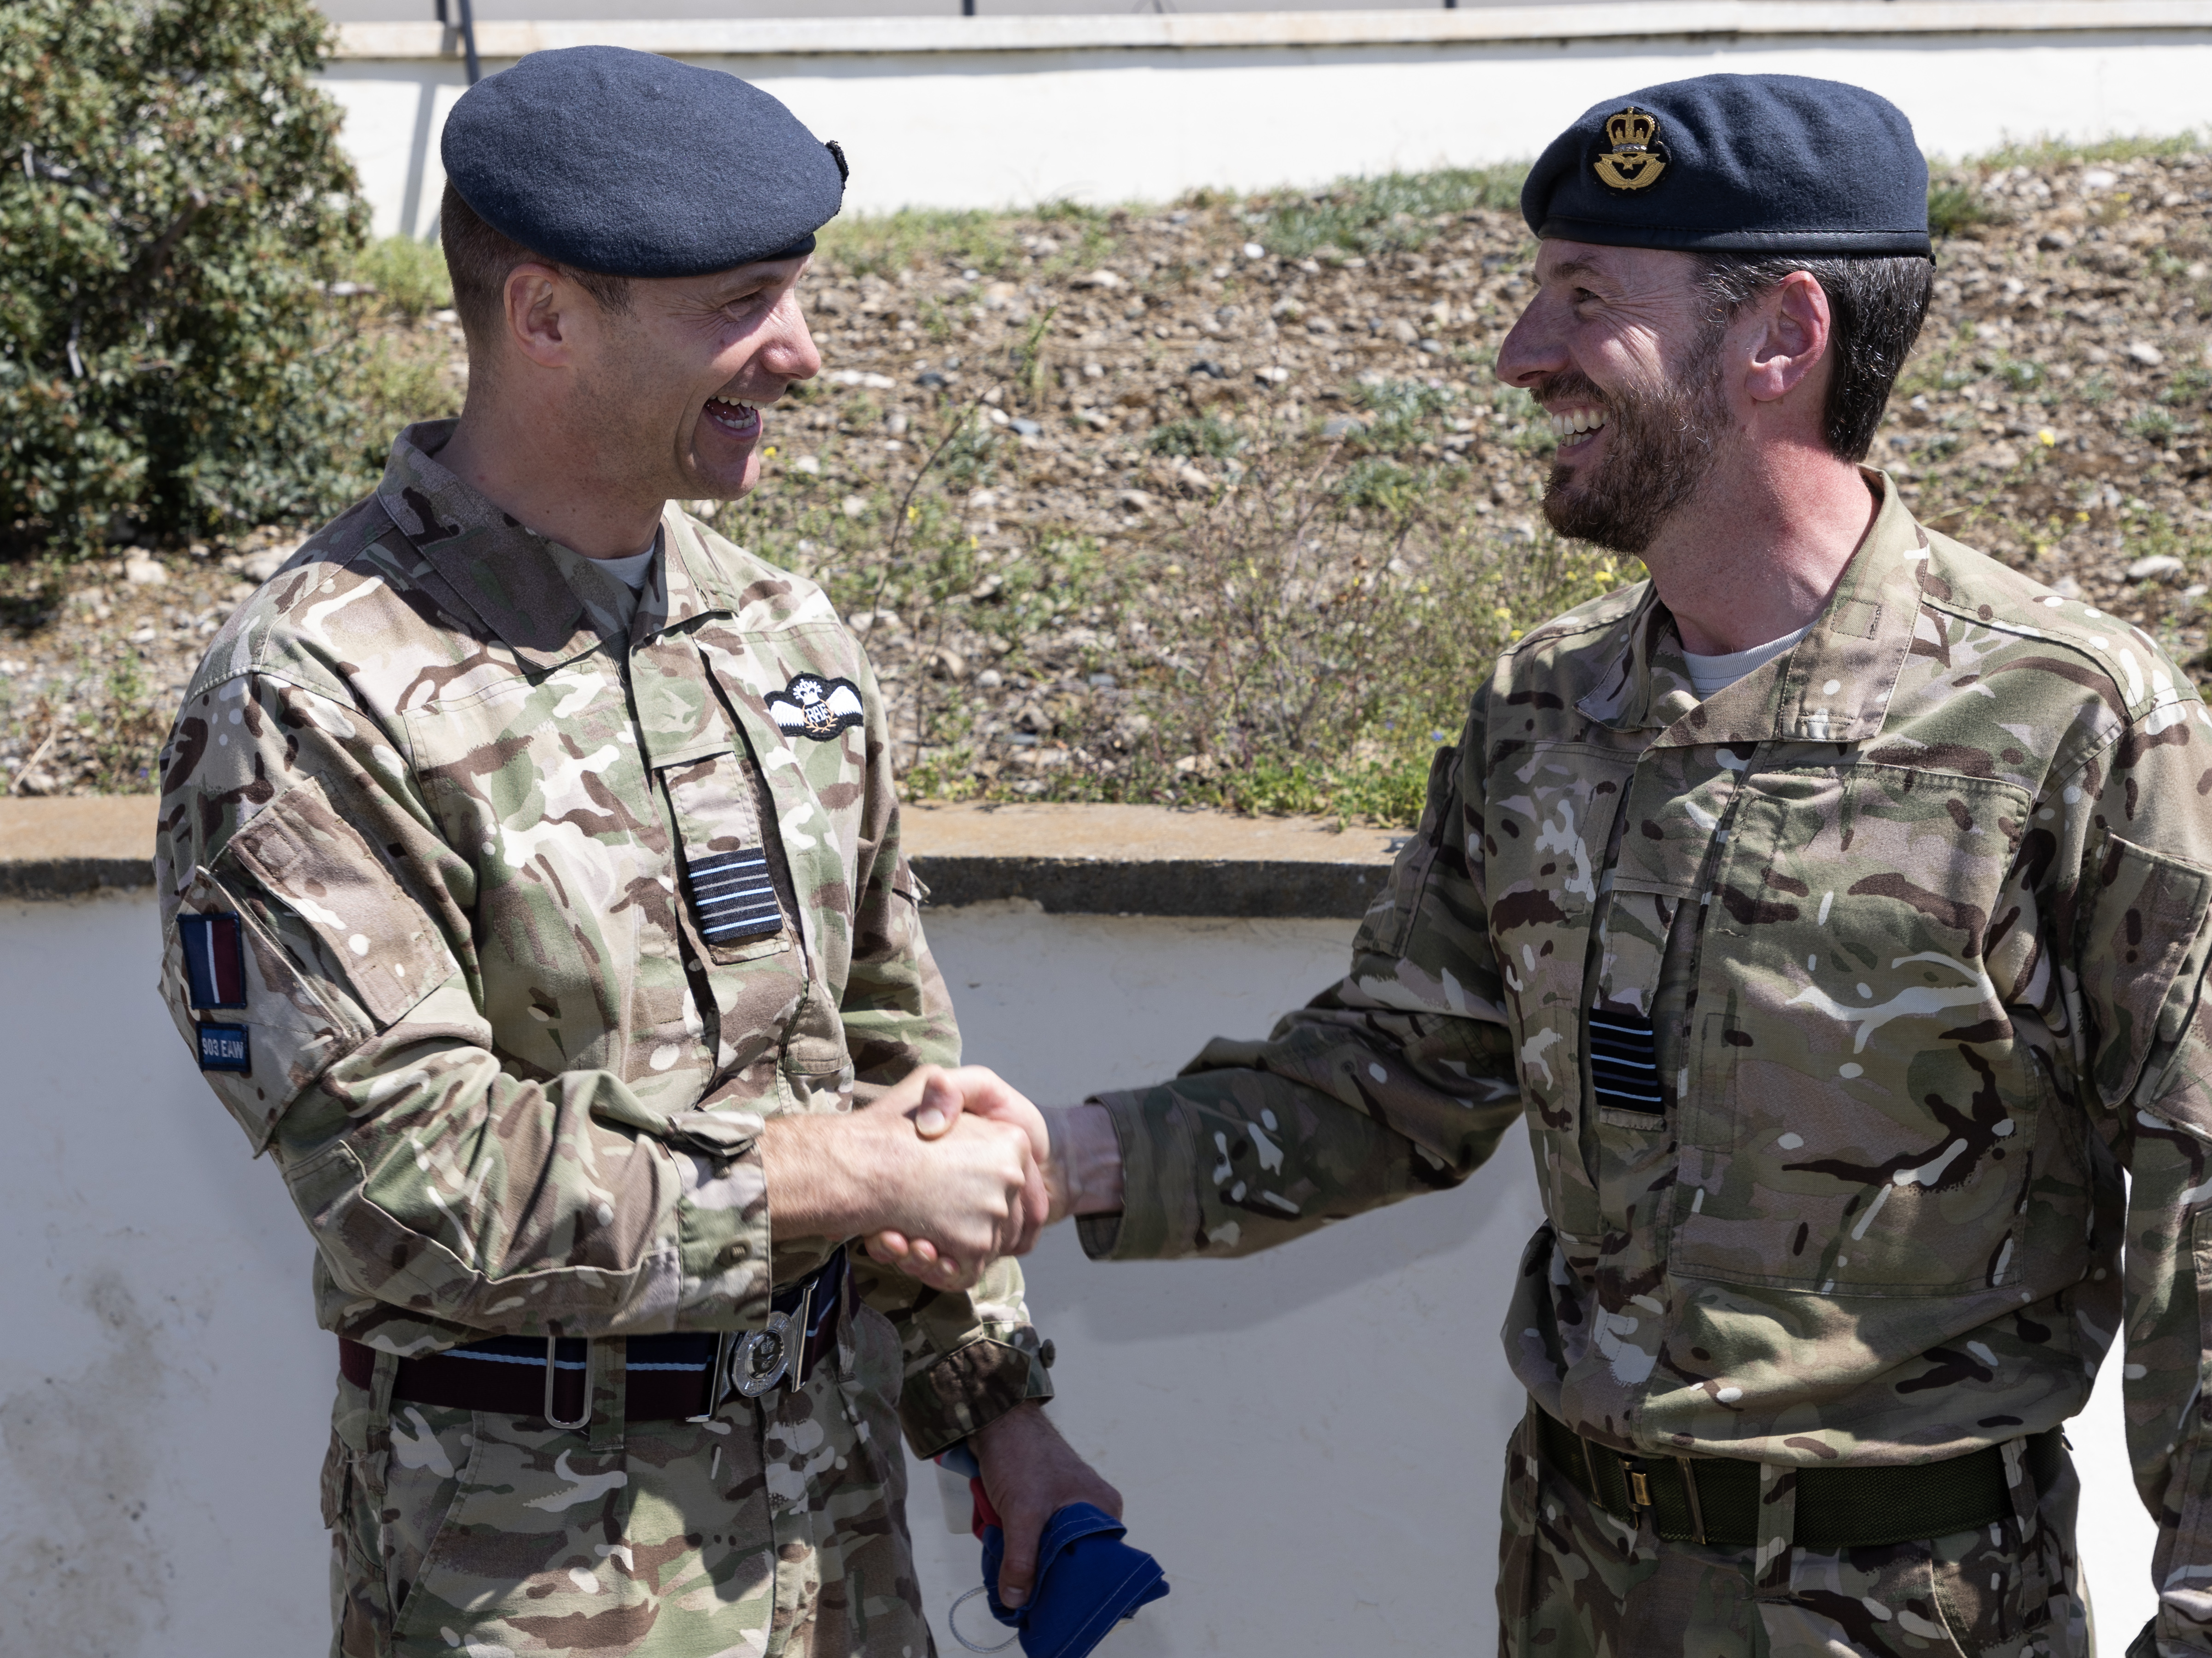 Image shows RAF personnel shaking hands.